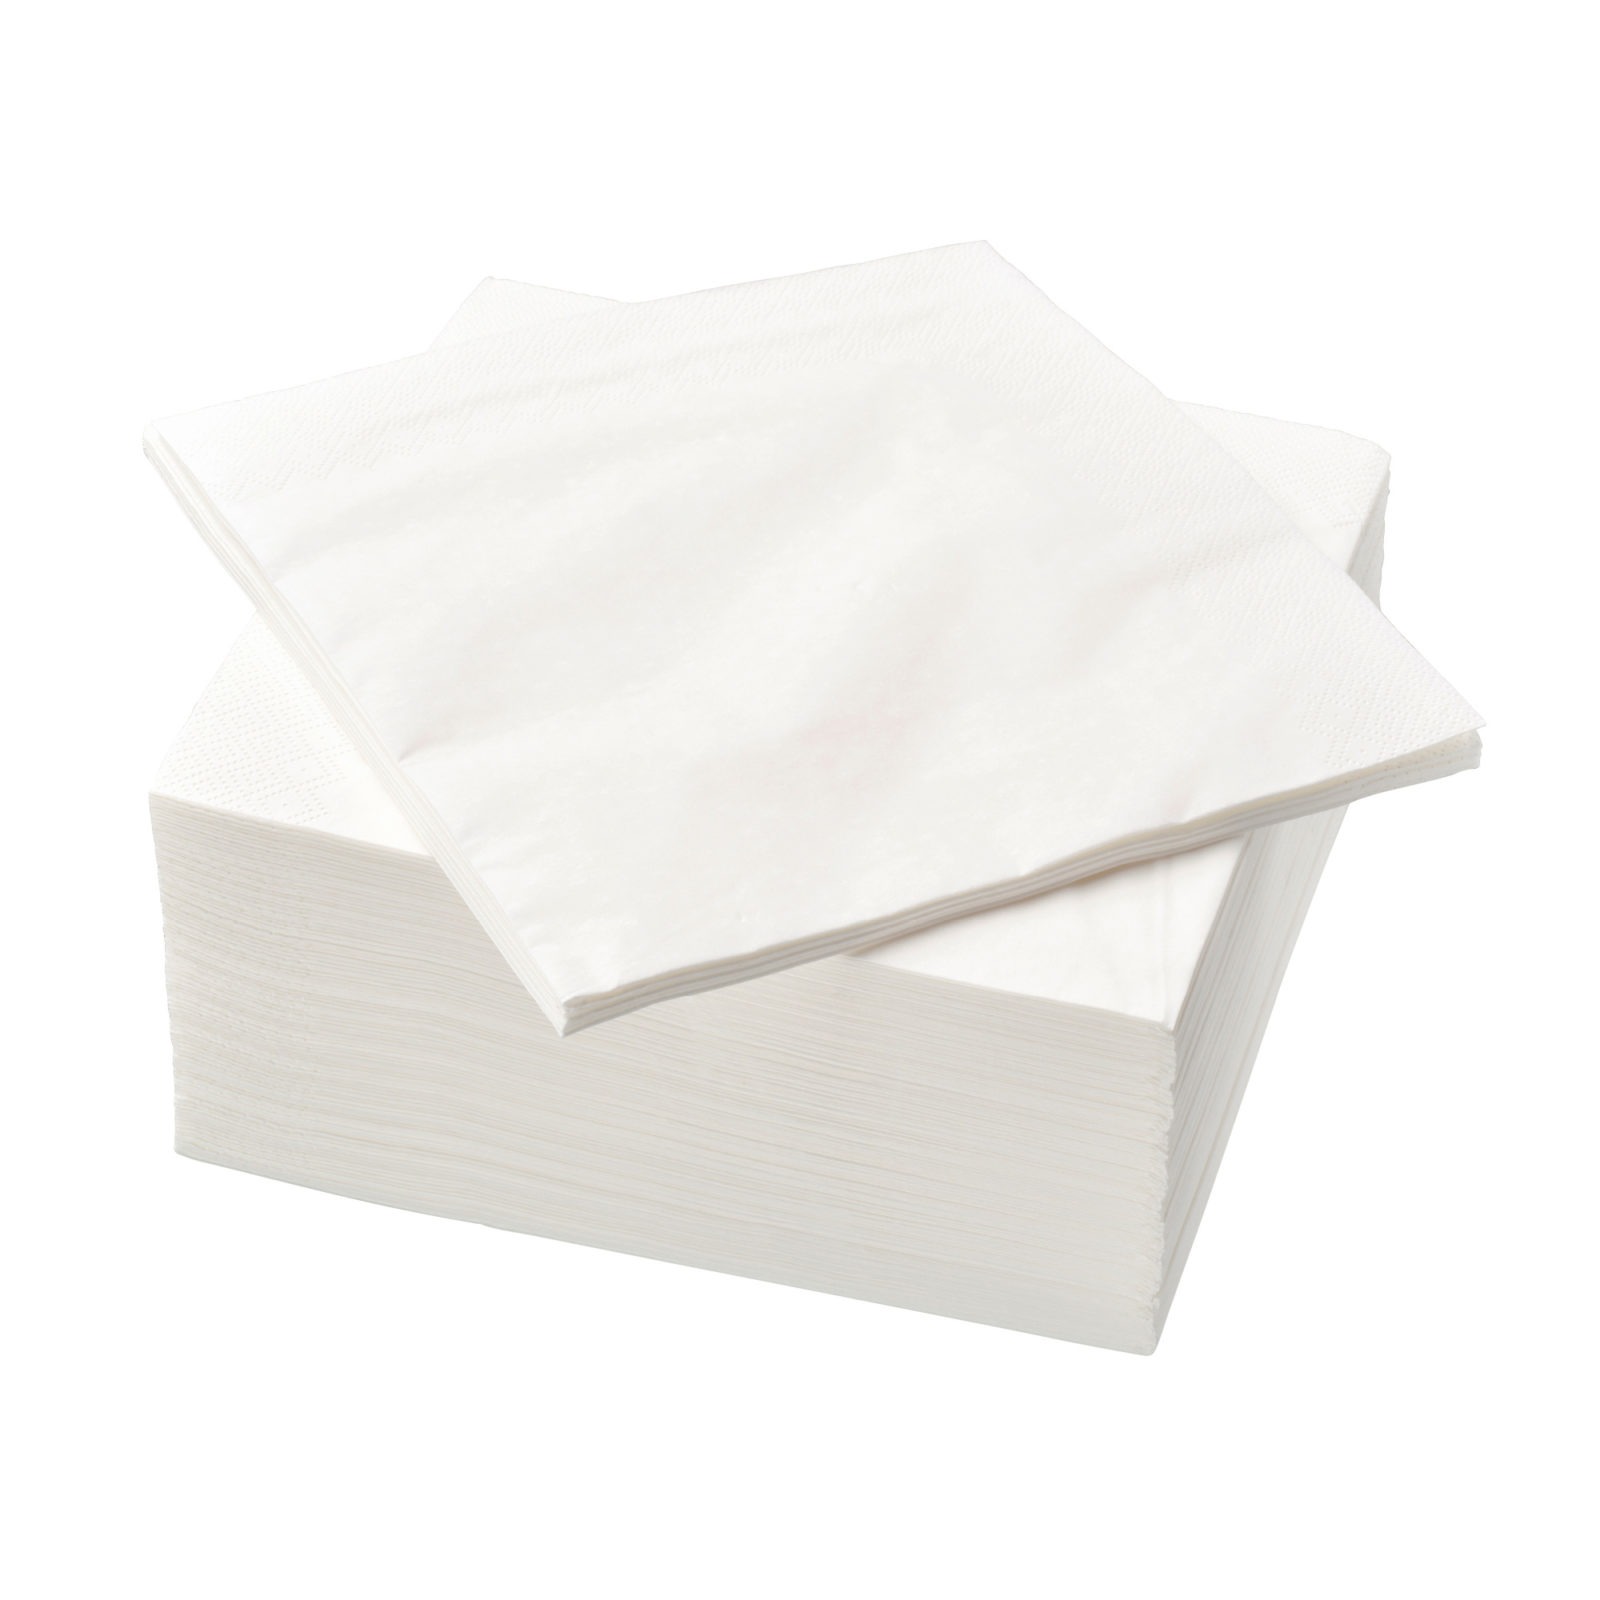 A stack of white paper napkins.